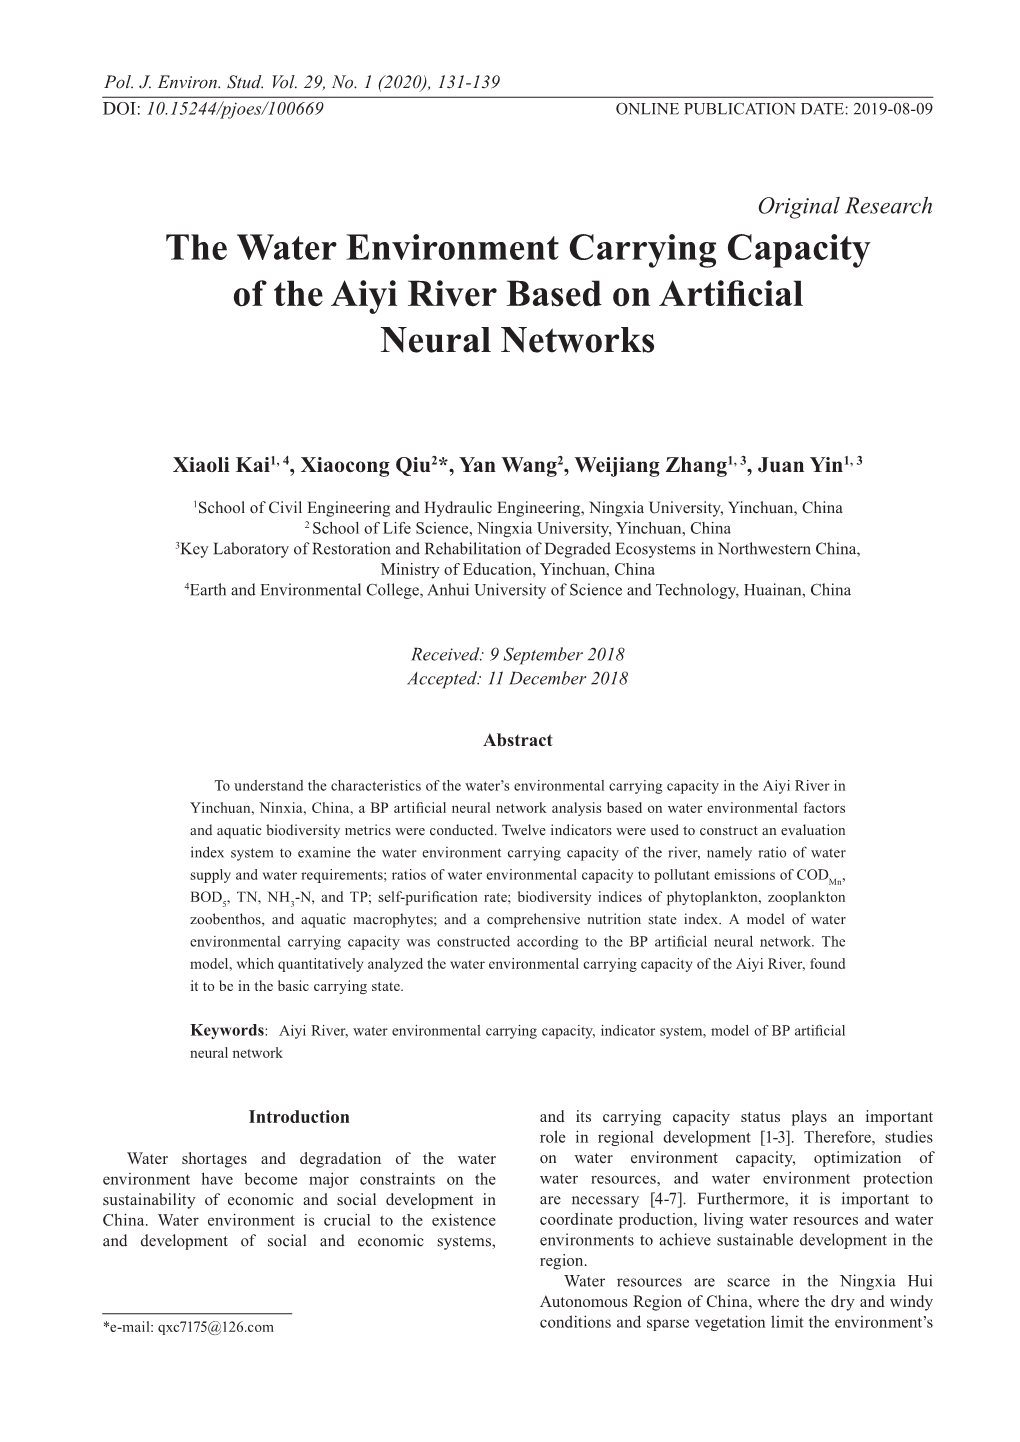 The Water Environment Carrying Capacity of the Aiyi River Based on Artificial Neural Networks